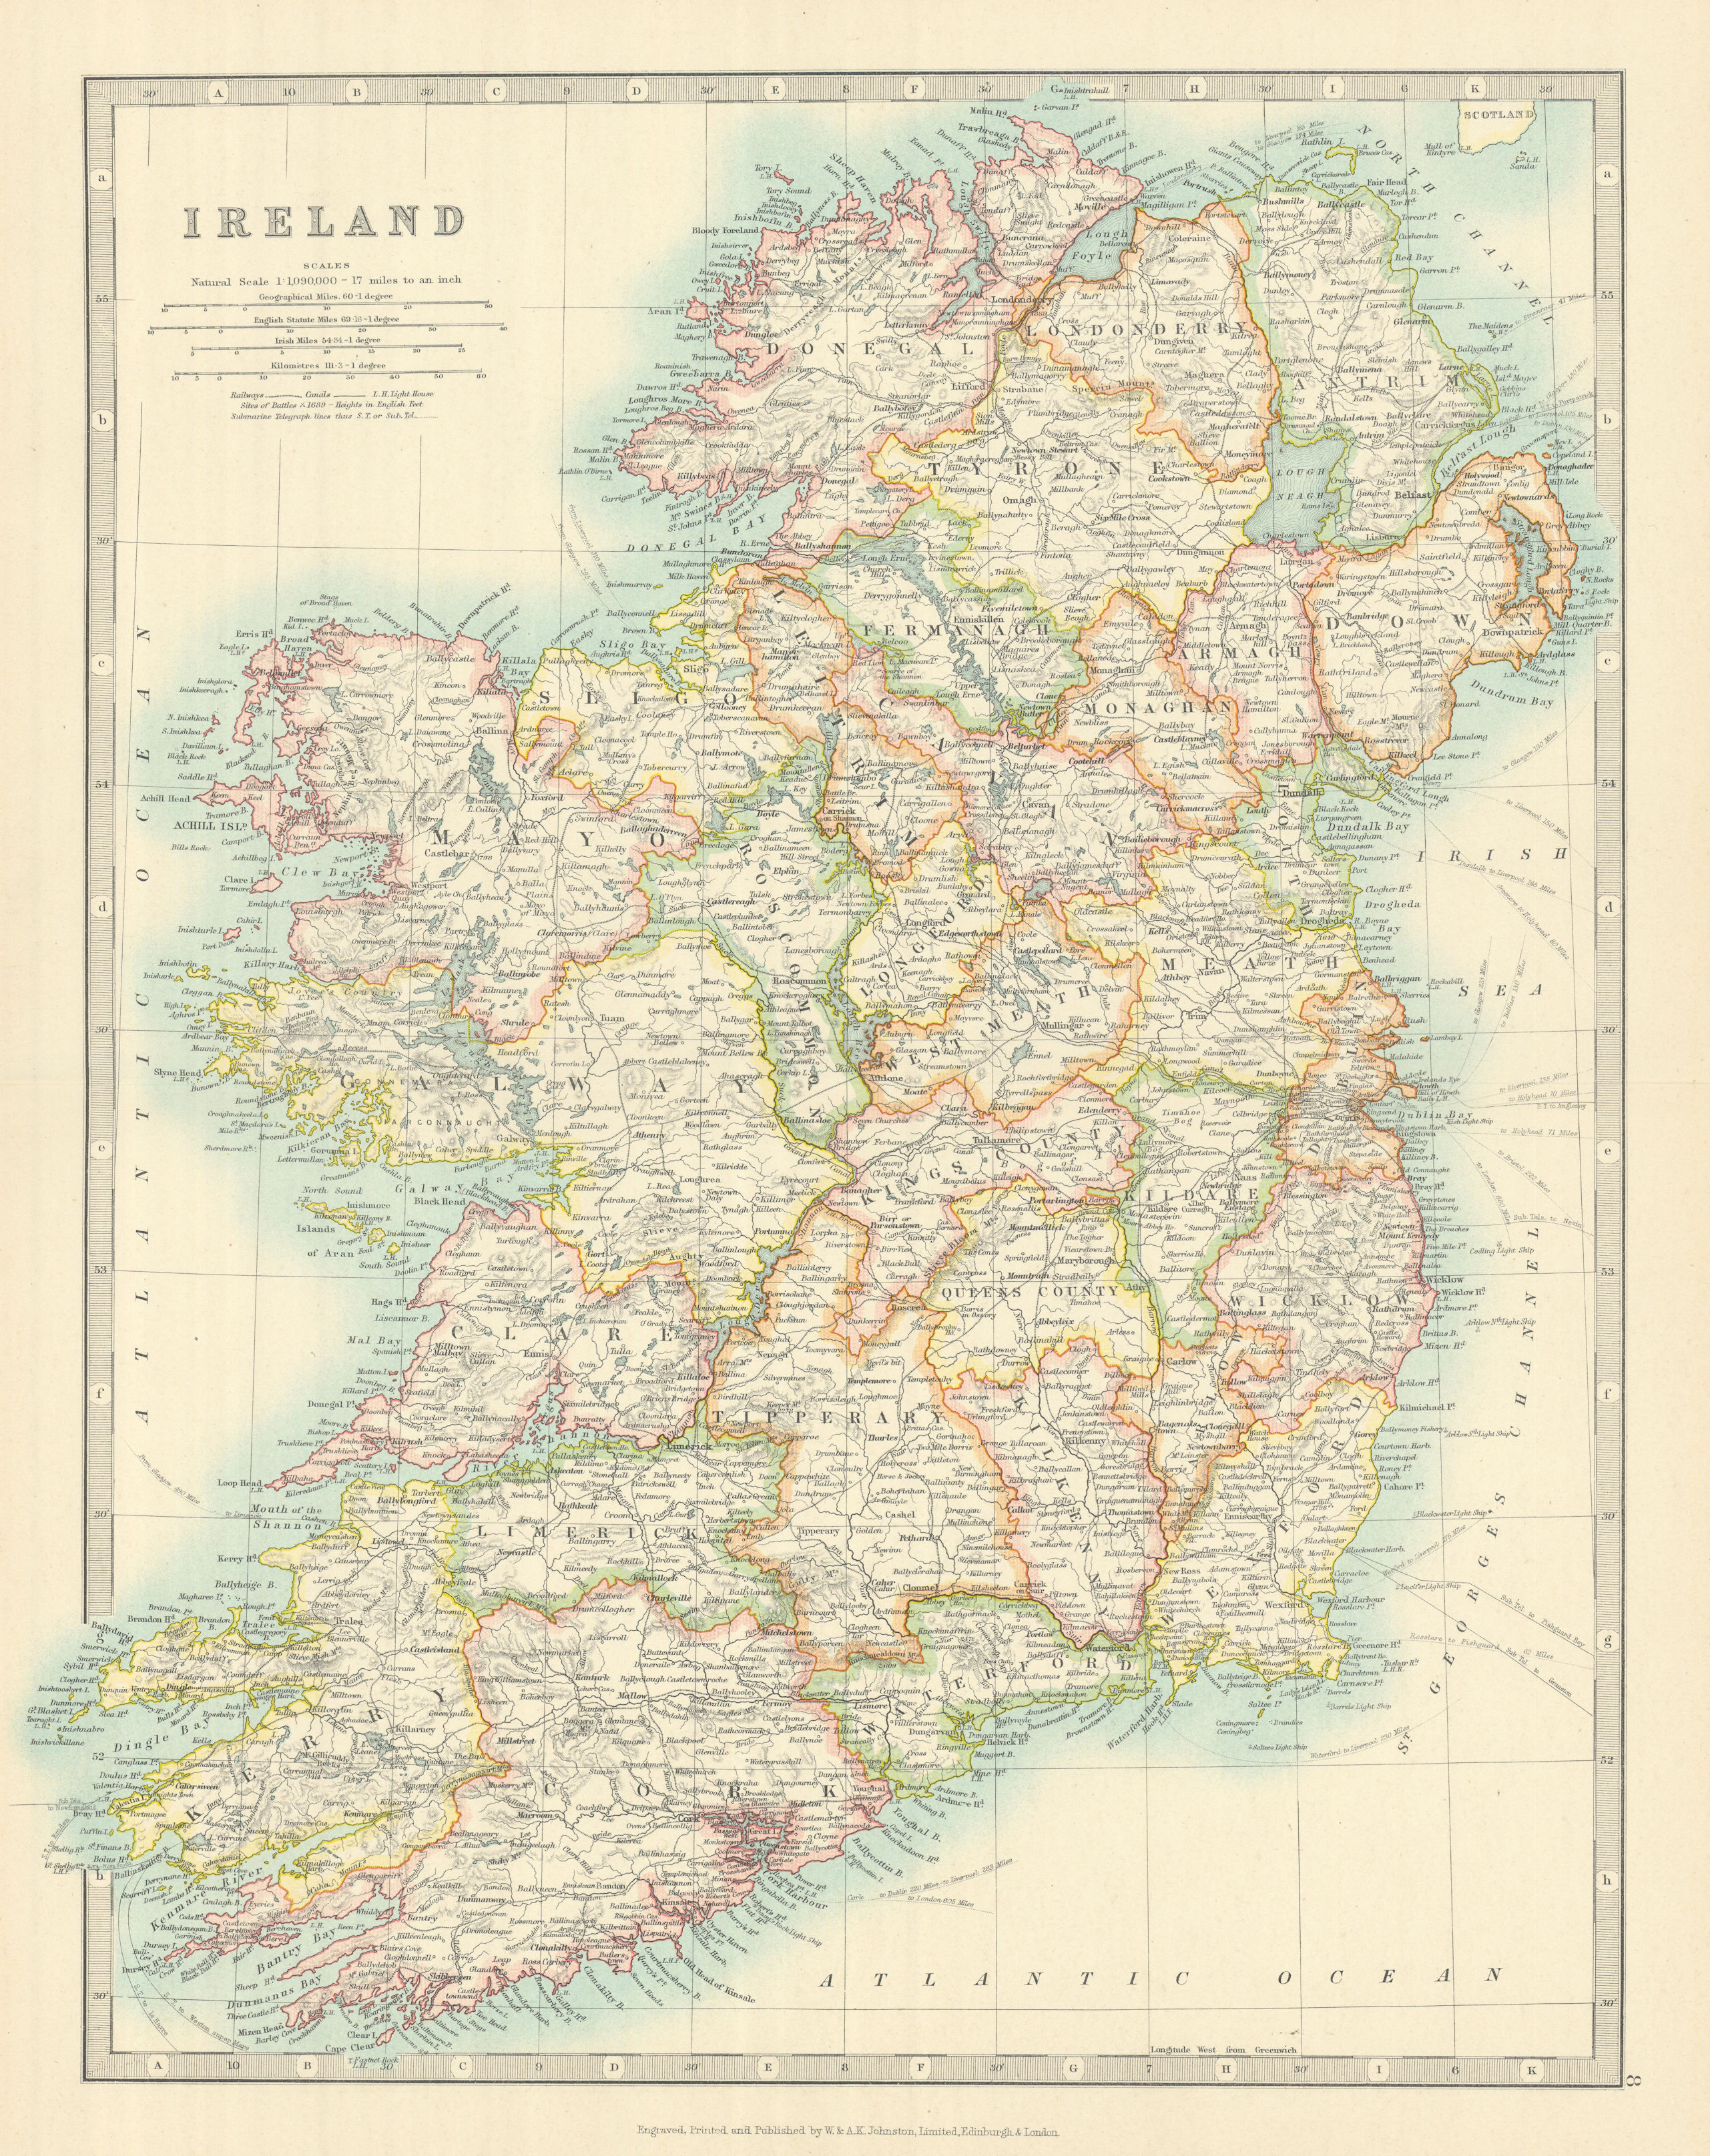 Associate Product IRELAND showing battlefields and dates. JOHNSTON 1913 old antique map chart